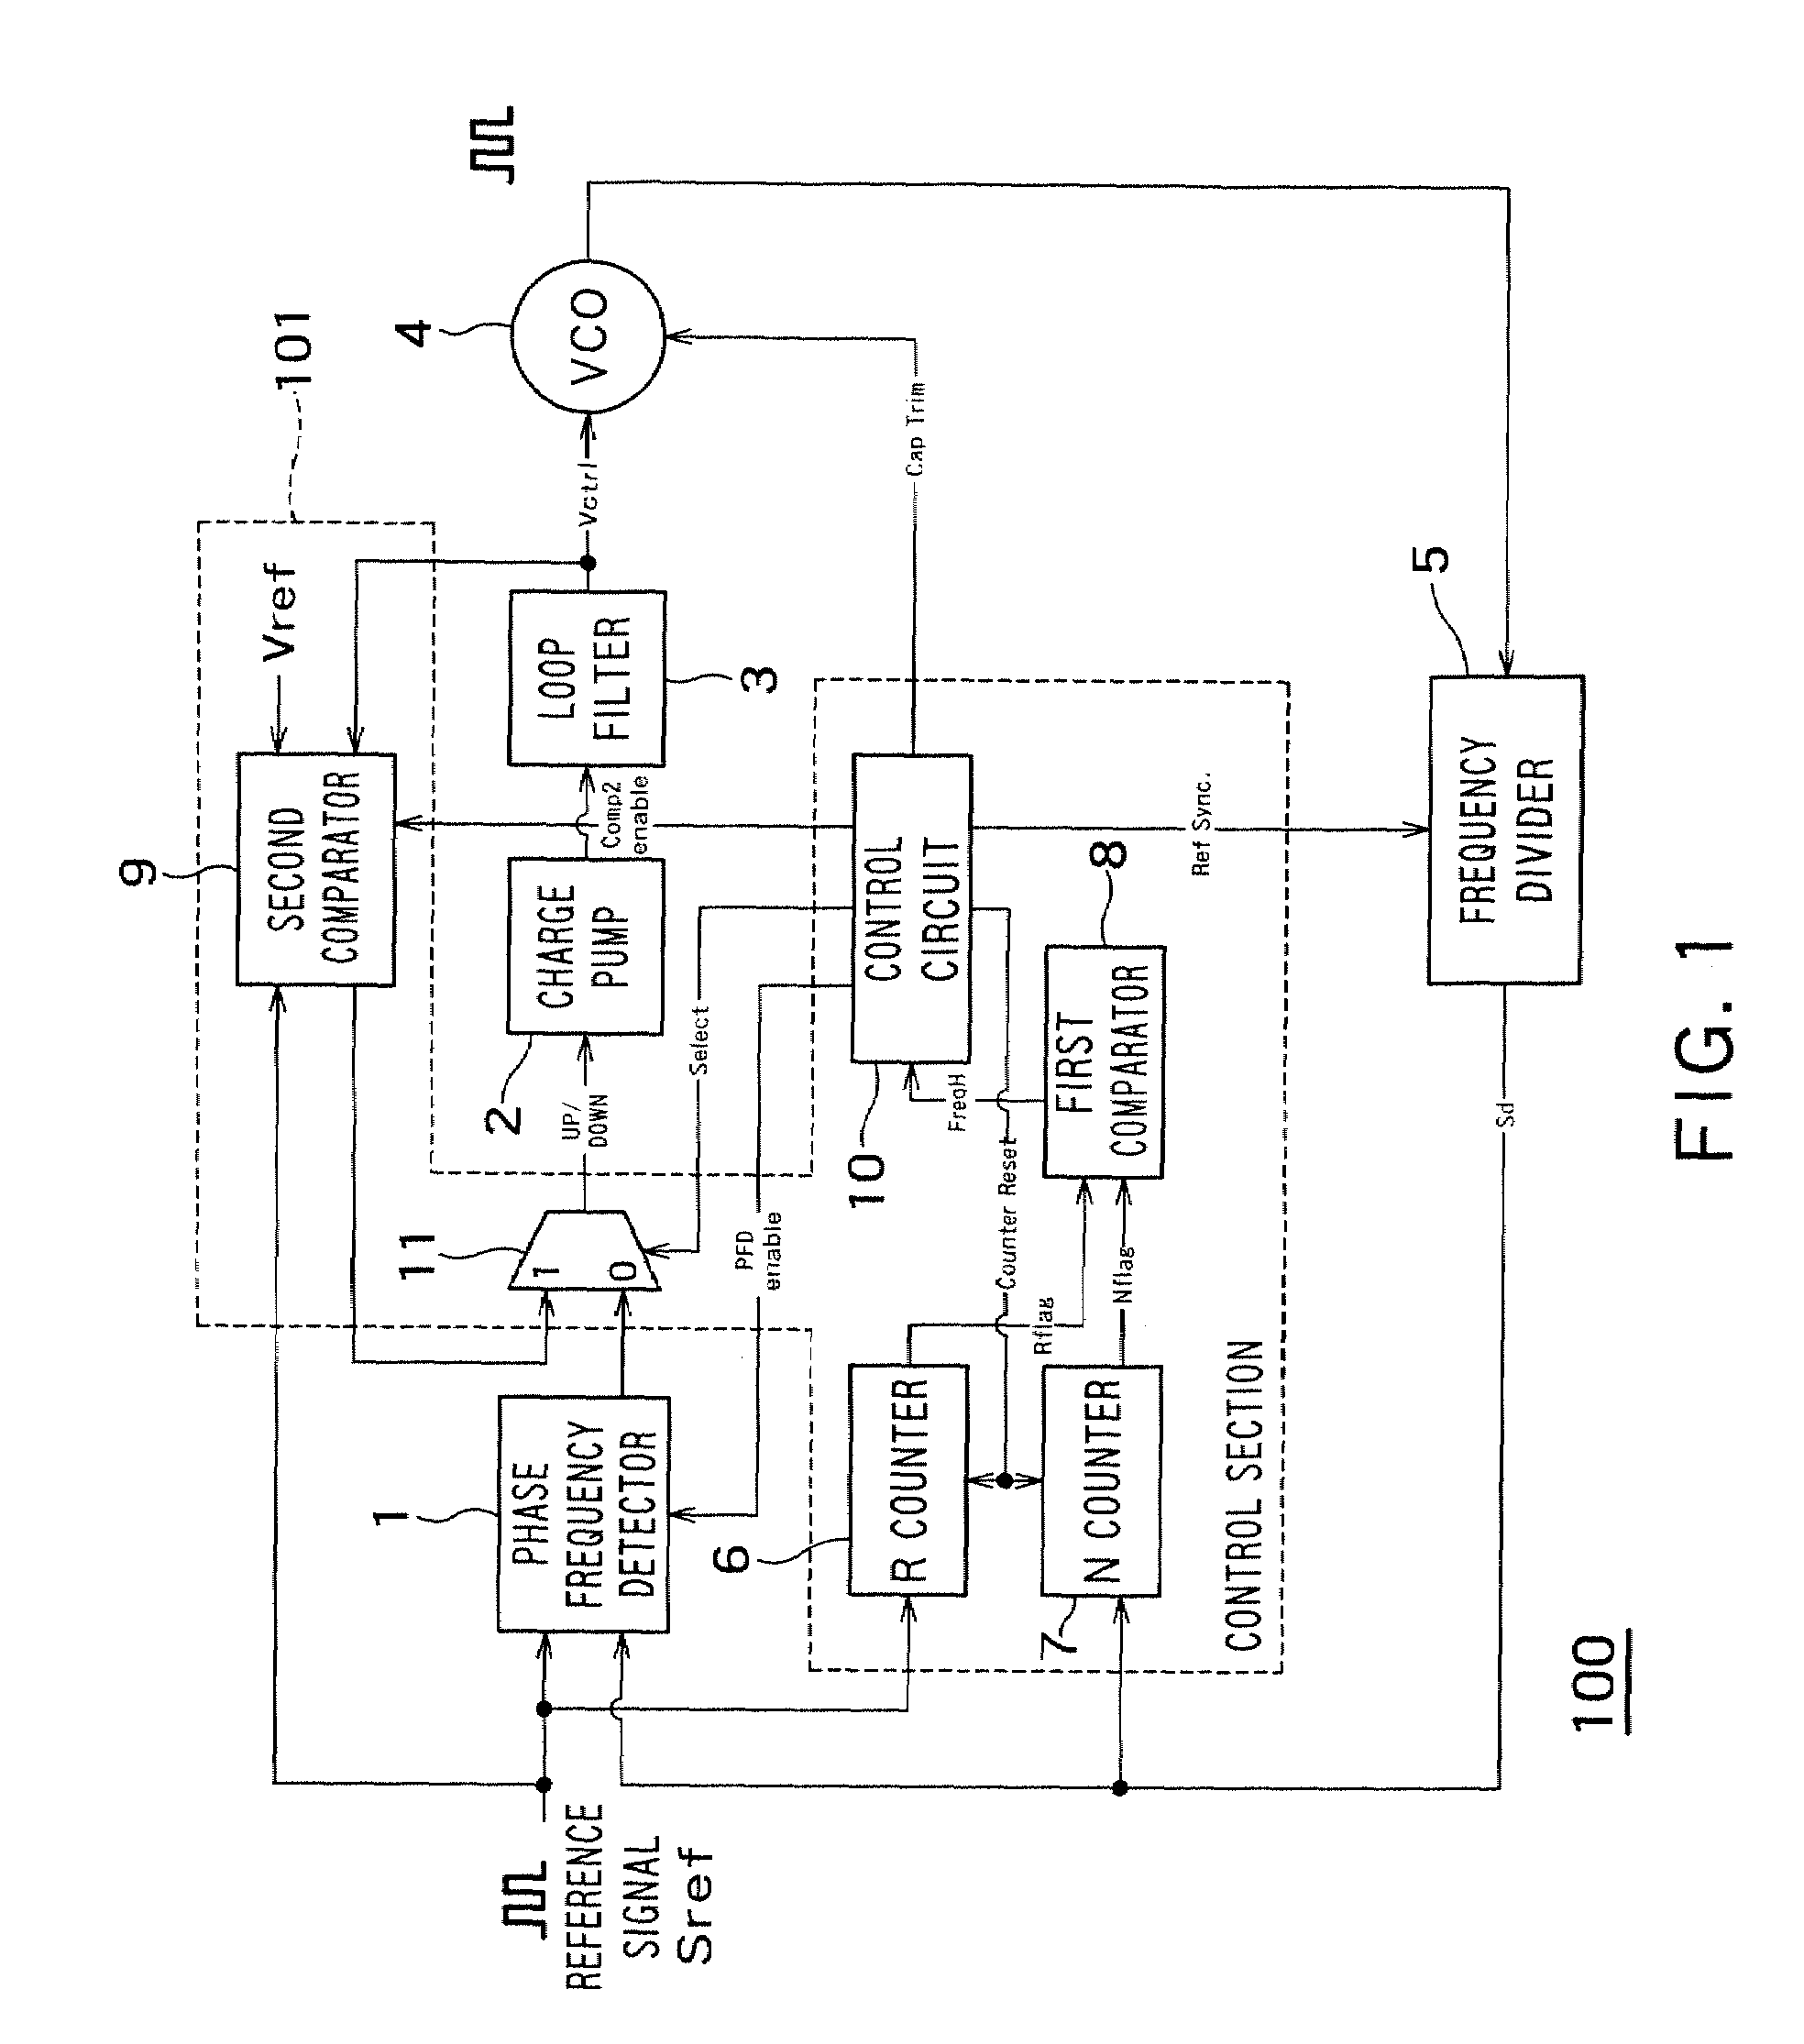 Oscillator controller incorporating a voltage-controlled oscillator that outputs an oscillation signal at a desired oscillation frequency